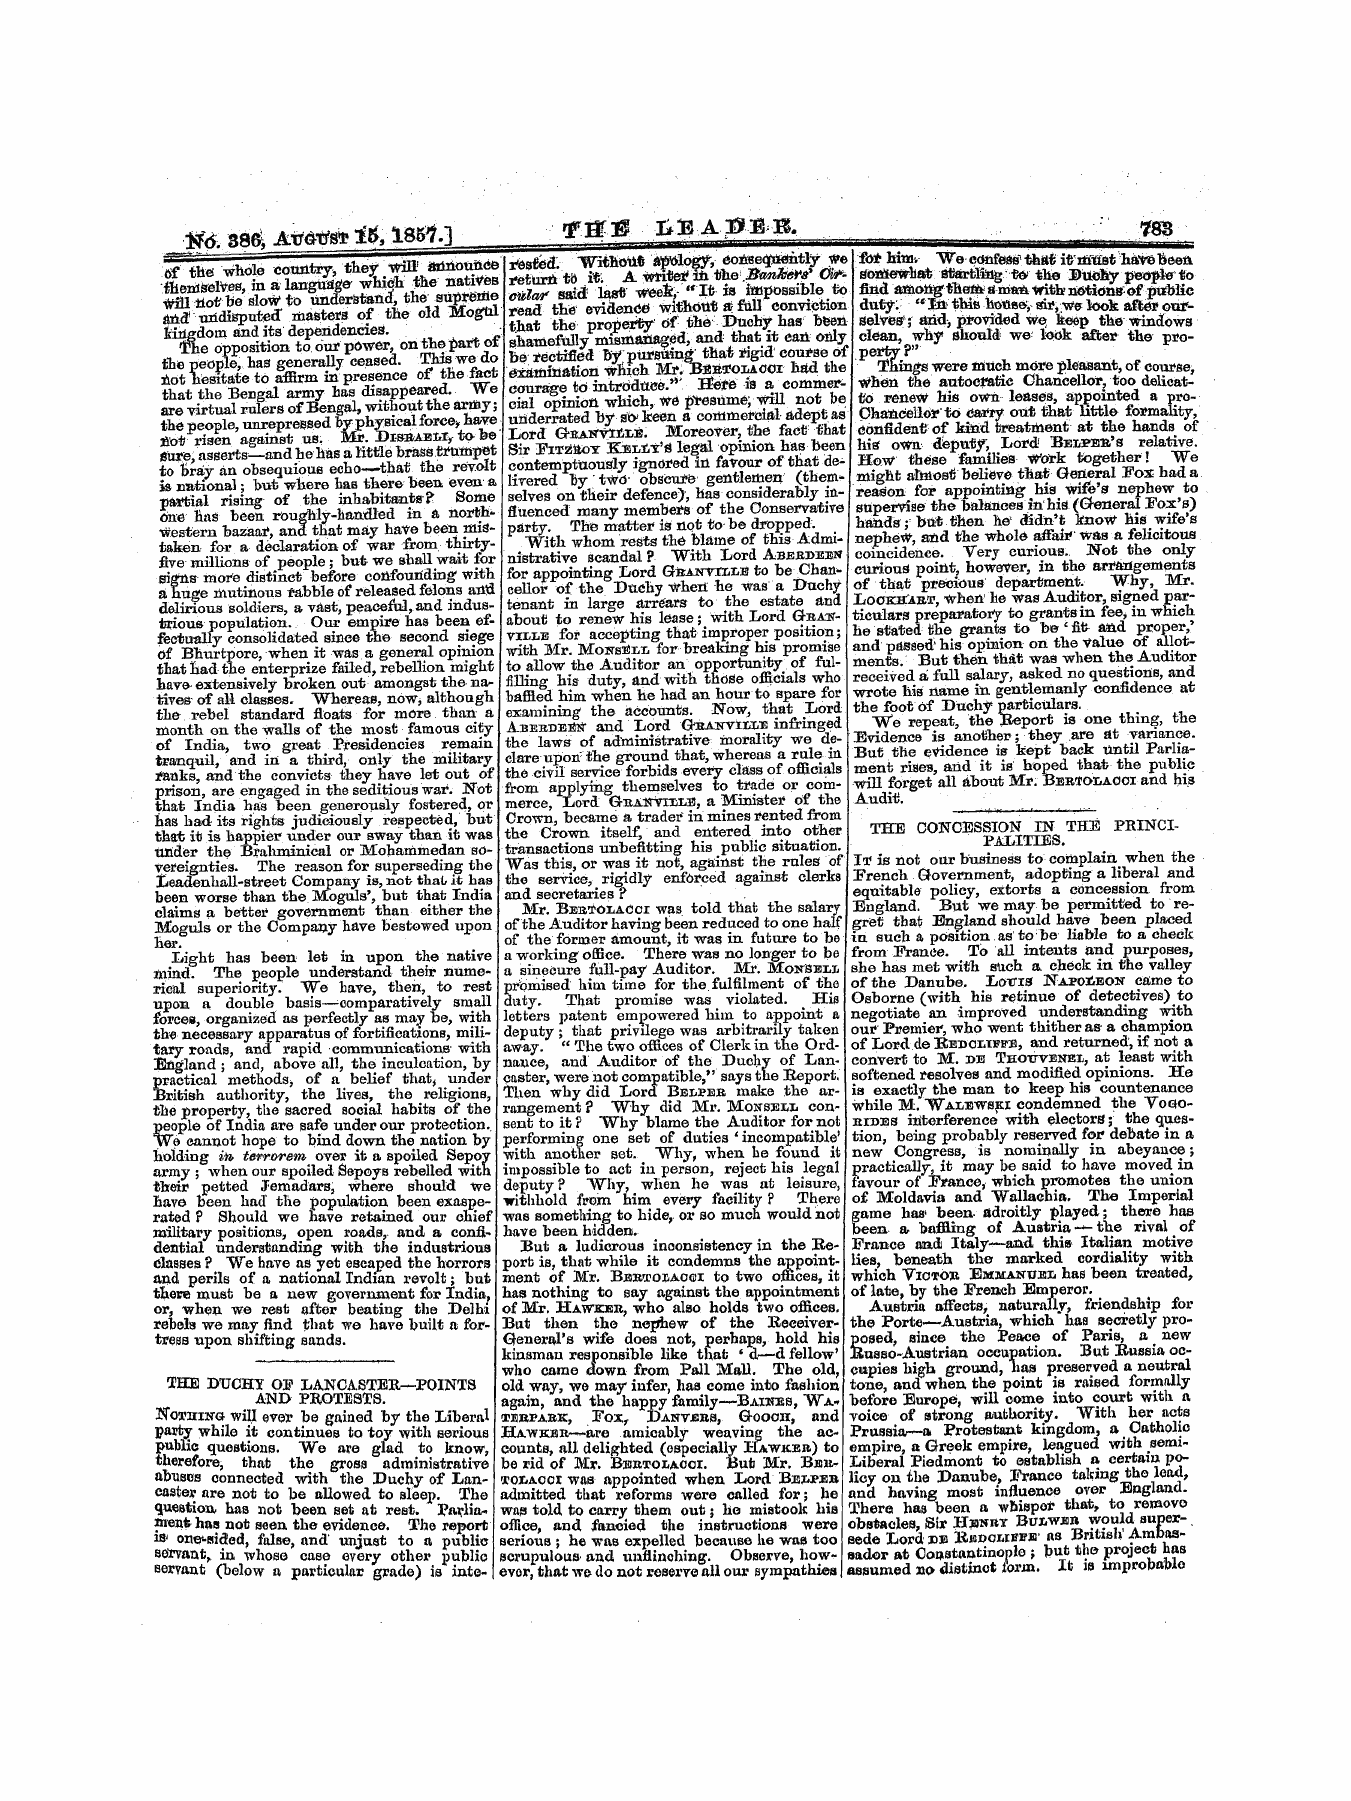 Leader (1850-1860): jS F Y, 1st edition: 15